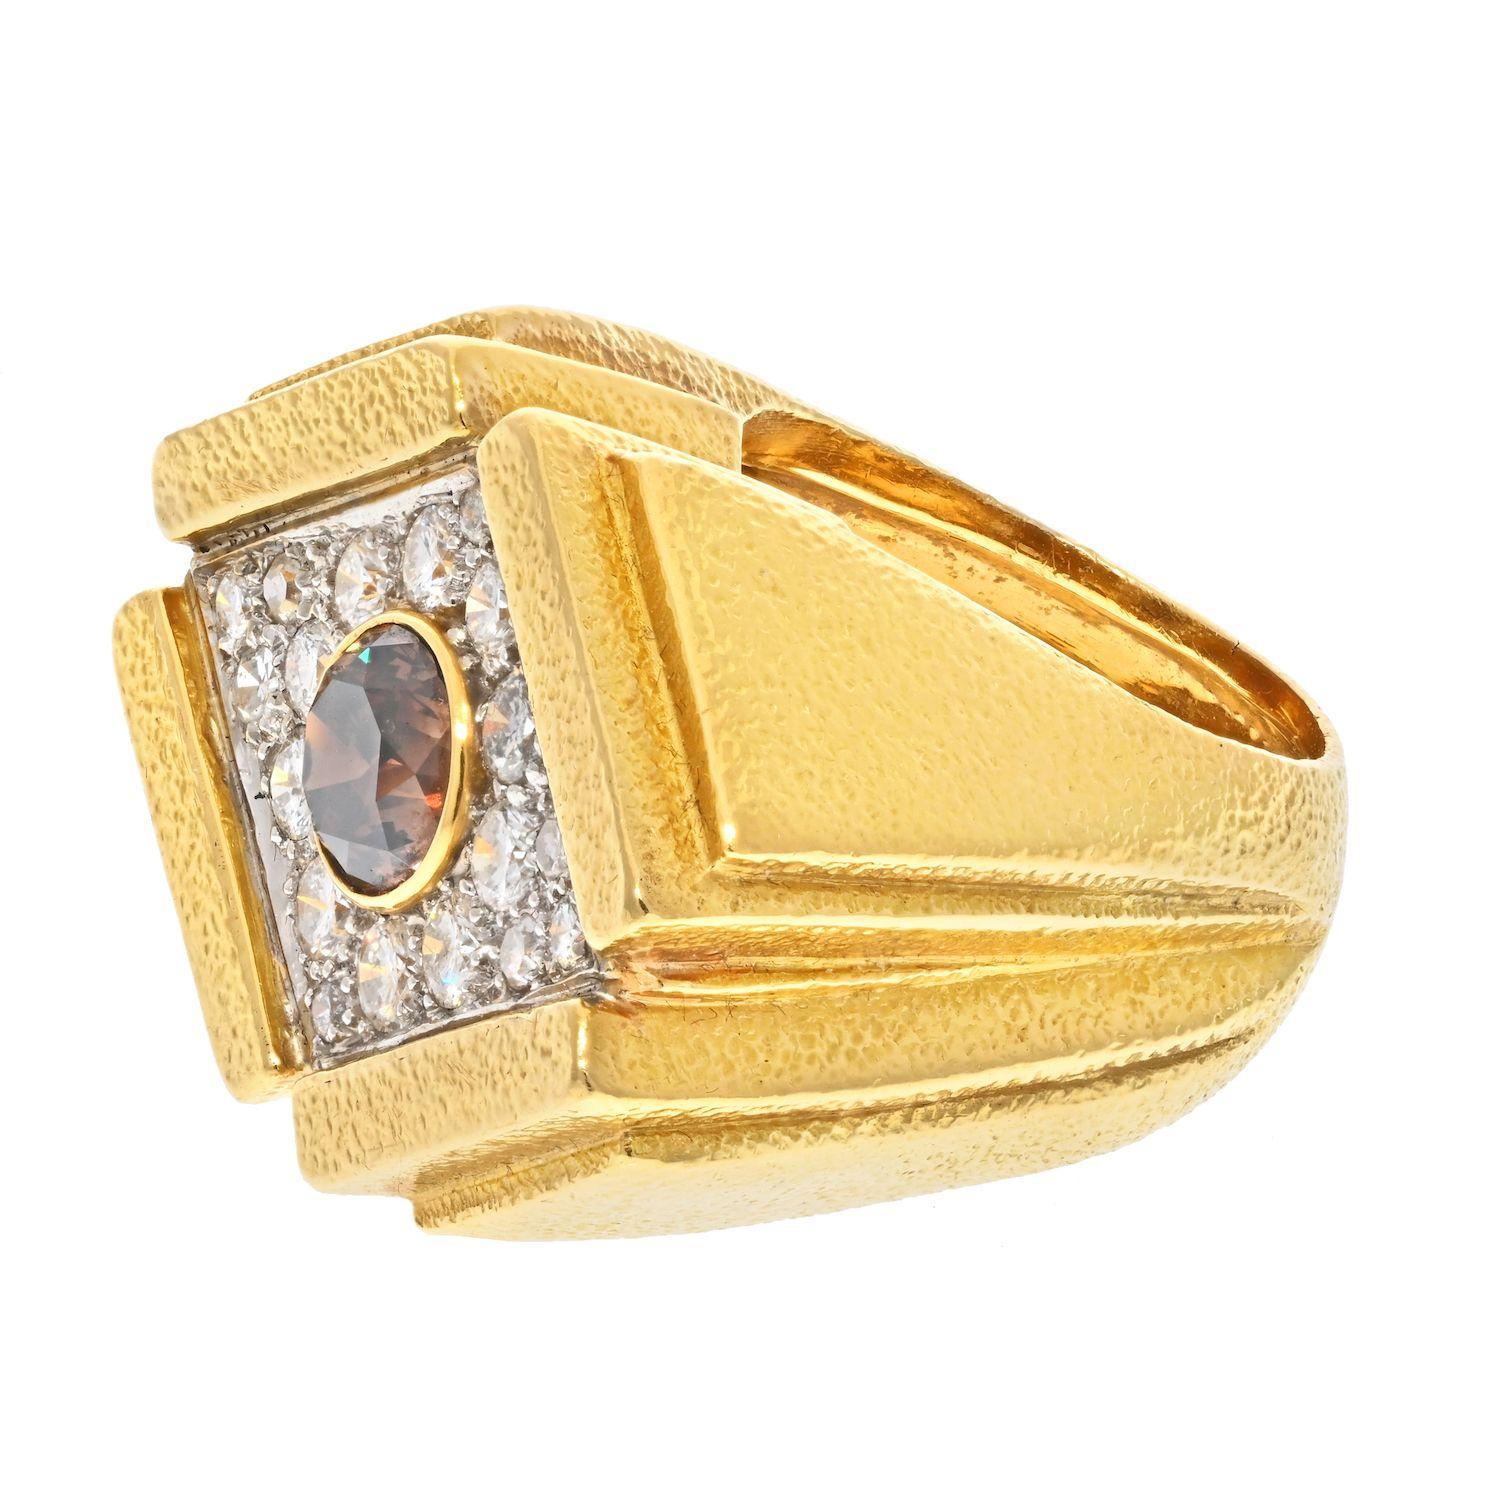 This is a modern looking oversized champagne diamond ring by David Webb. It is made in 18K solid gold as all of his rings, diamonds are mounted in platinum. This ring has a signature finish to the gold surface and sits tall off the finger. 
Center